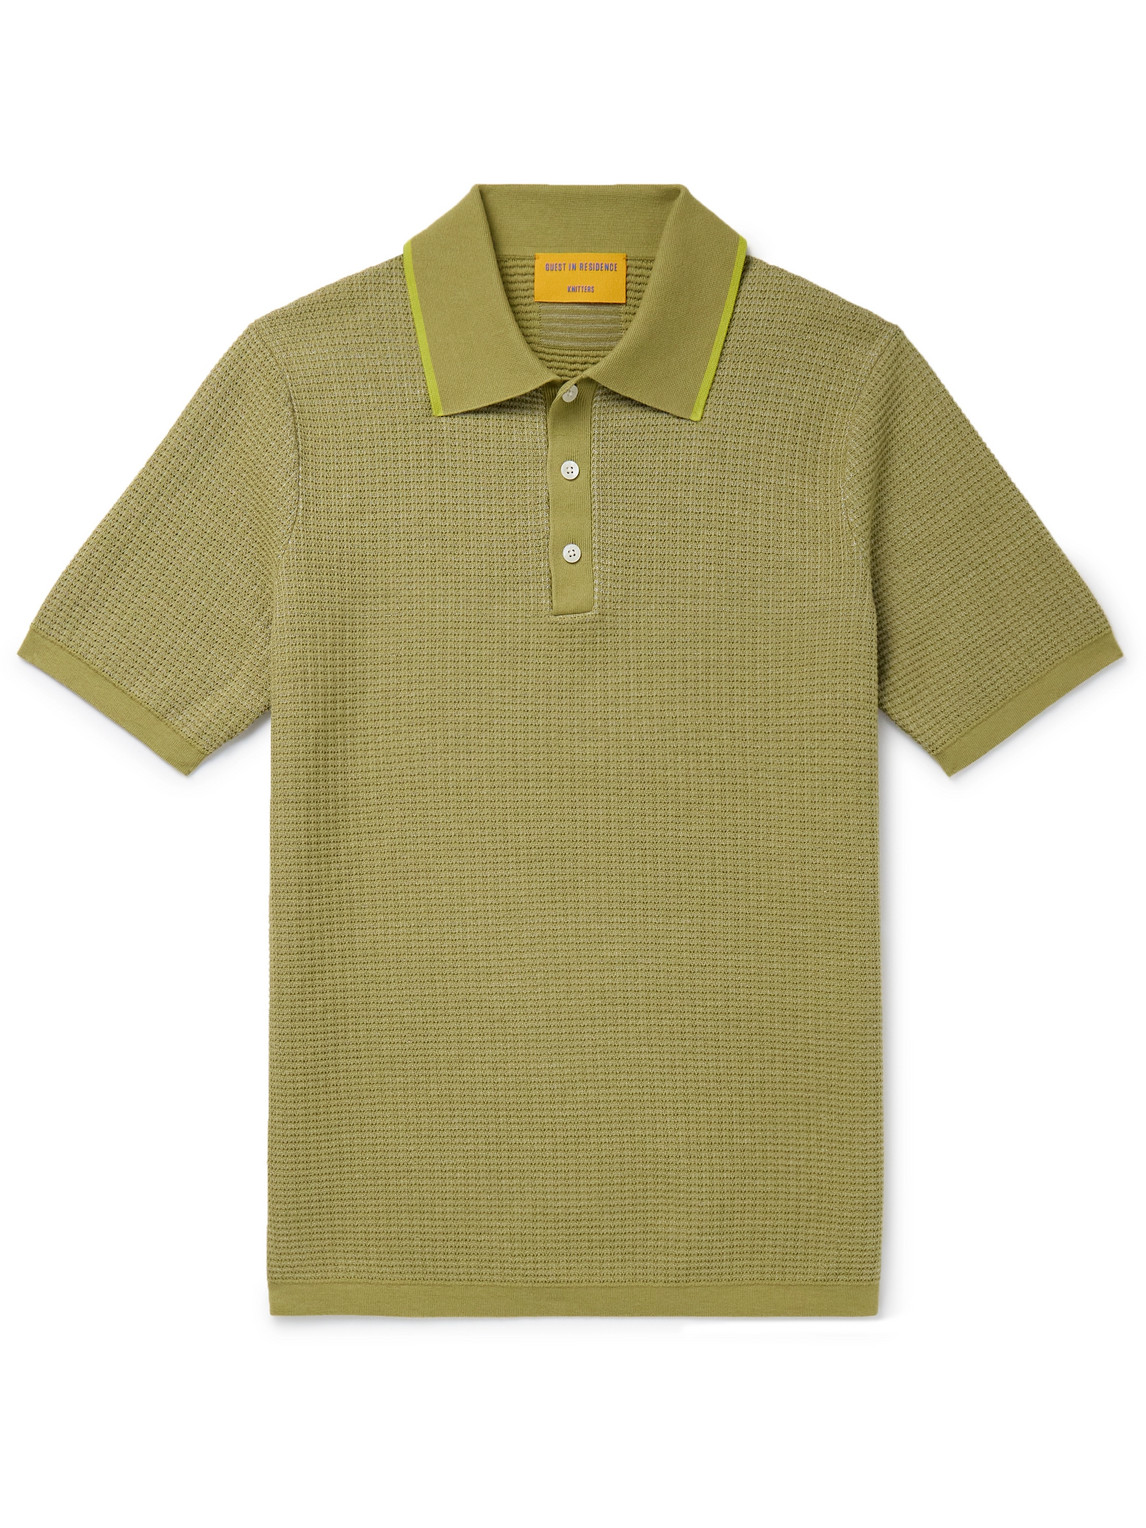 Guest In Residence - Striped Textured-Knit Cotton Polo Shirt - Men - Green - S von Guest In Residence